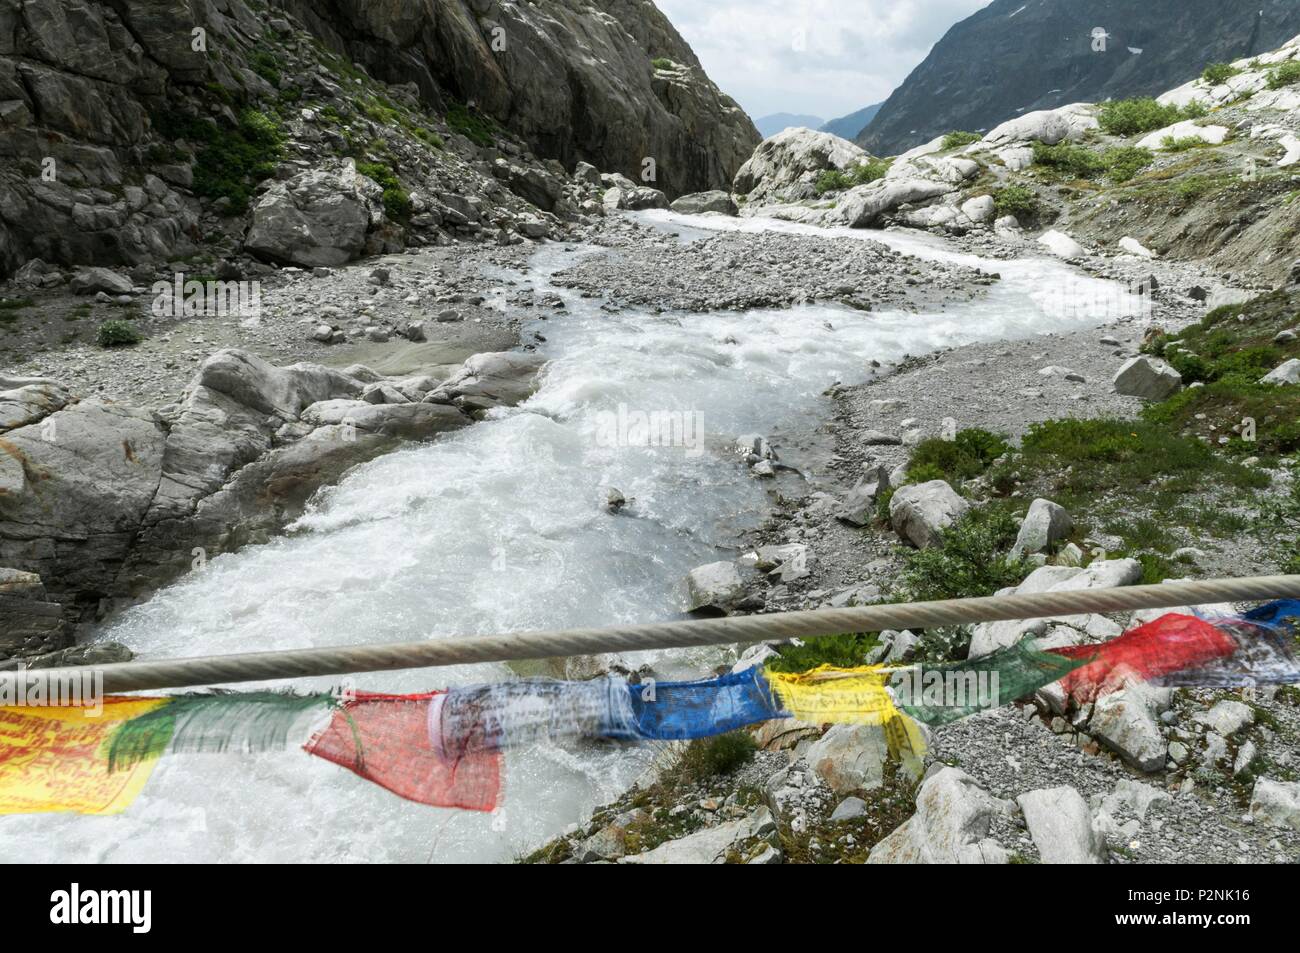 France, Hautes Alpes, Gyr river cfrom Glacier Blanc and view from bridgefoot on trail after Pre of Mme Carle Stock Photo